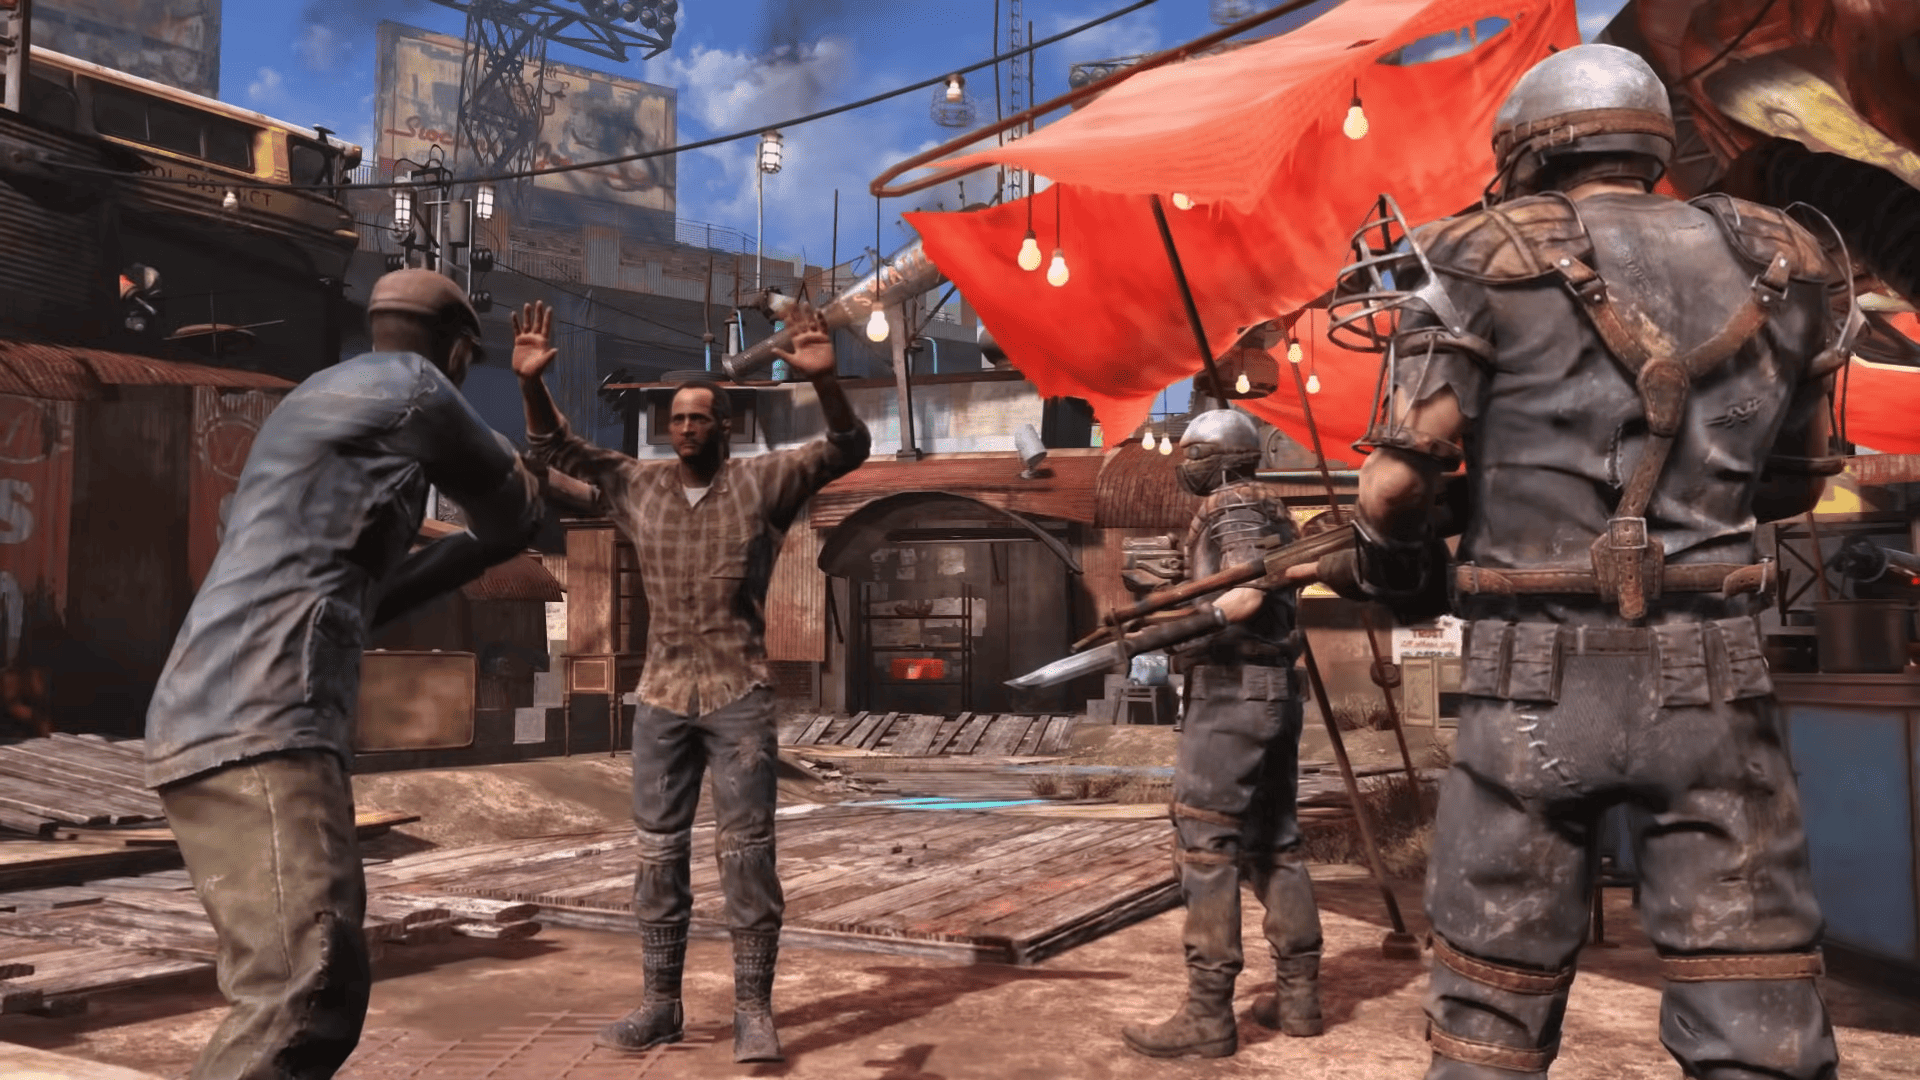 Fallout 5 release date - people celebrate in the streets during a trailer of Fallout 4.